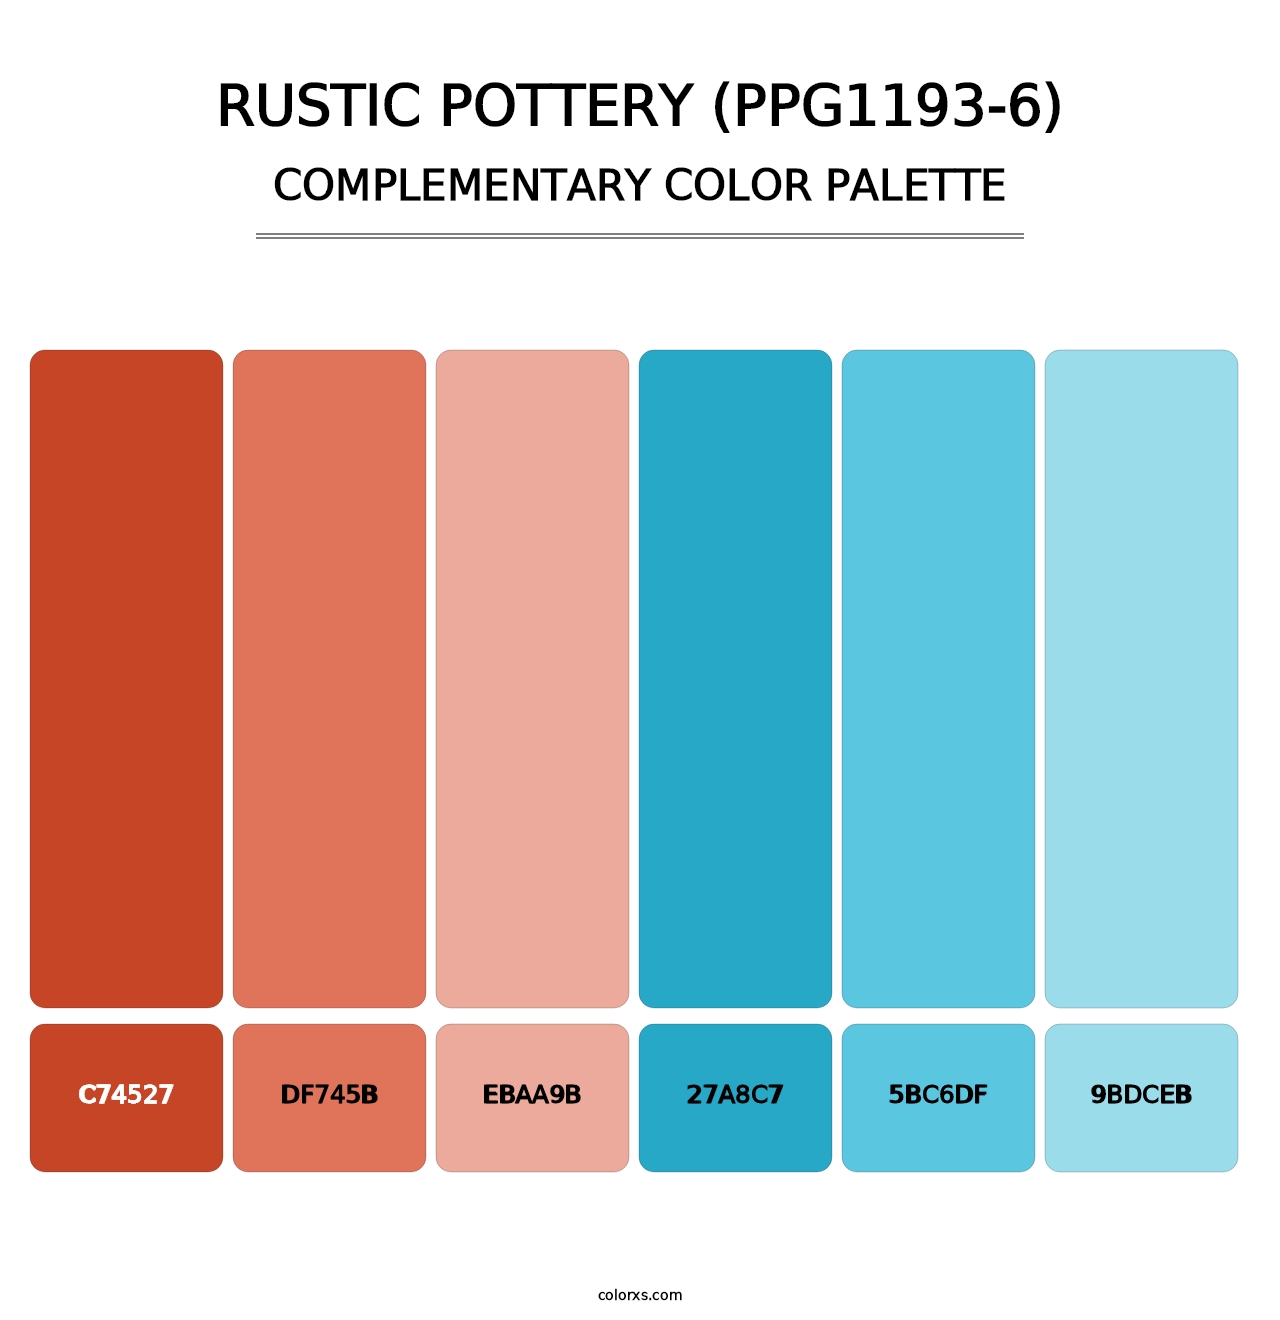 Rustic Pottery (PPG1193-6) - Complementary Color Palette